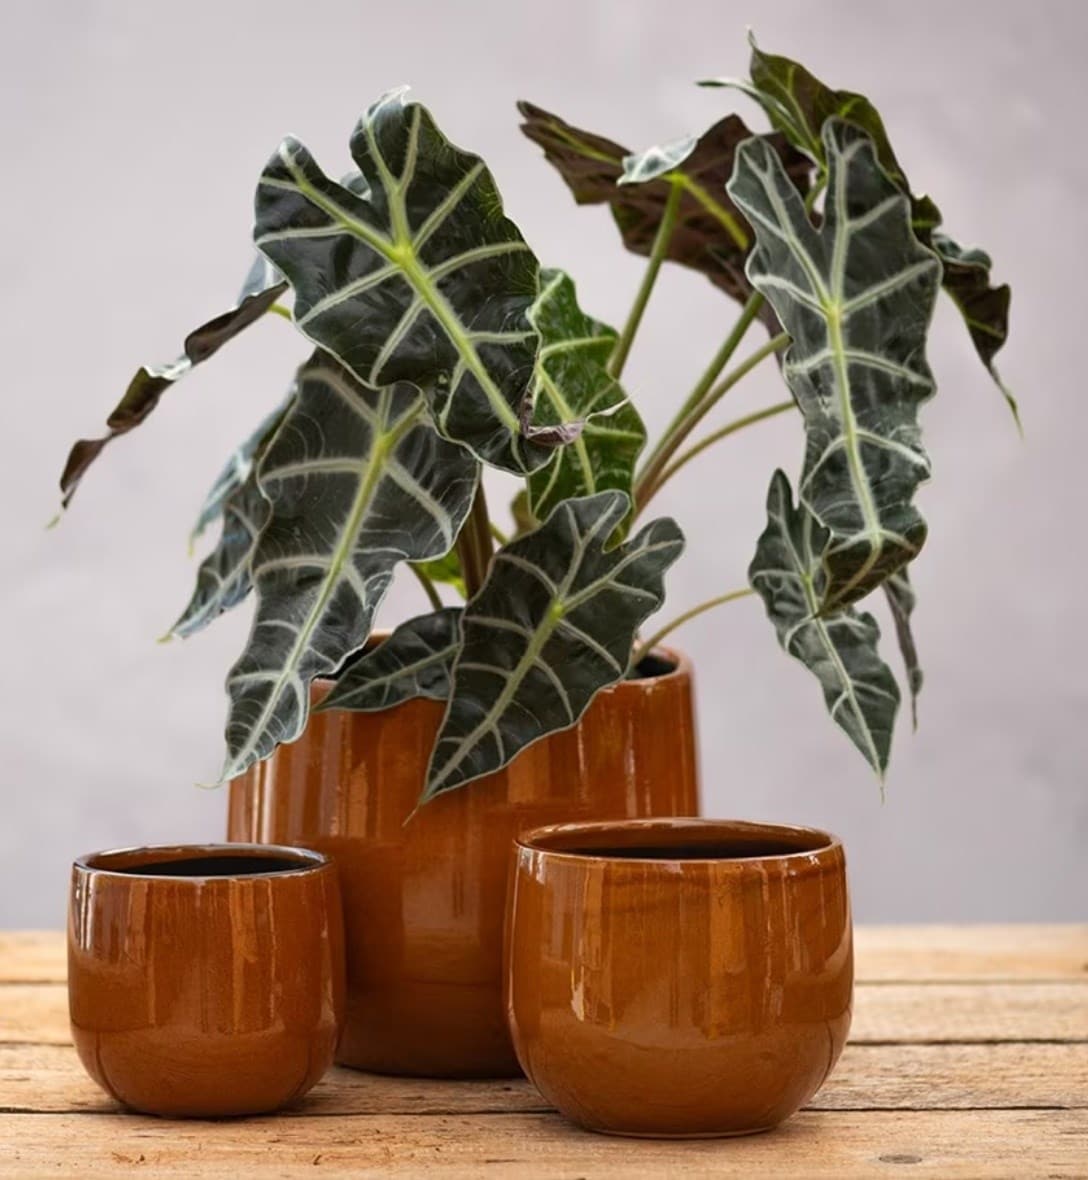 Discover our new indoor pots